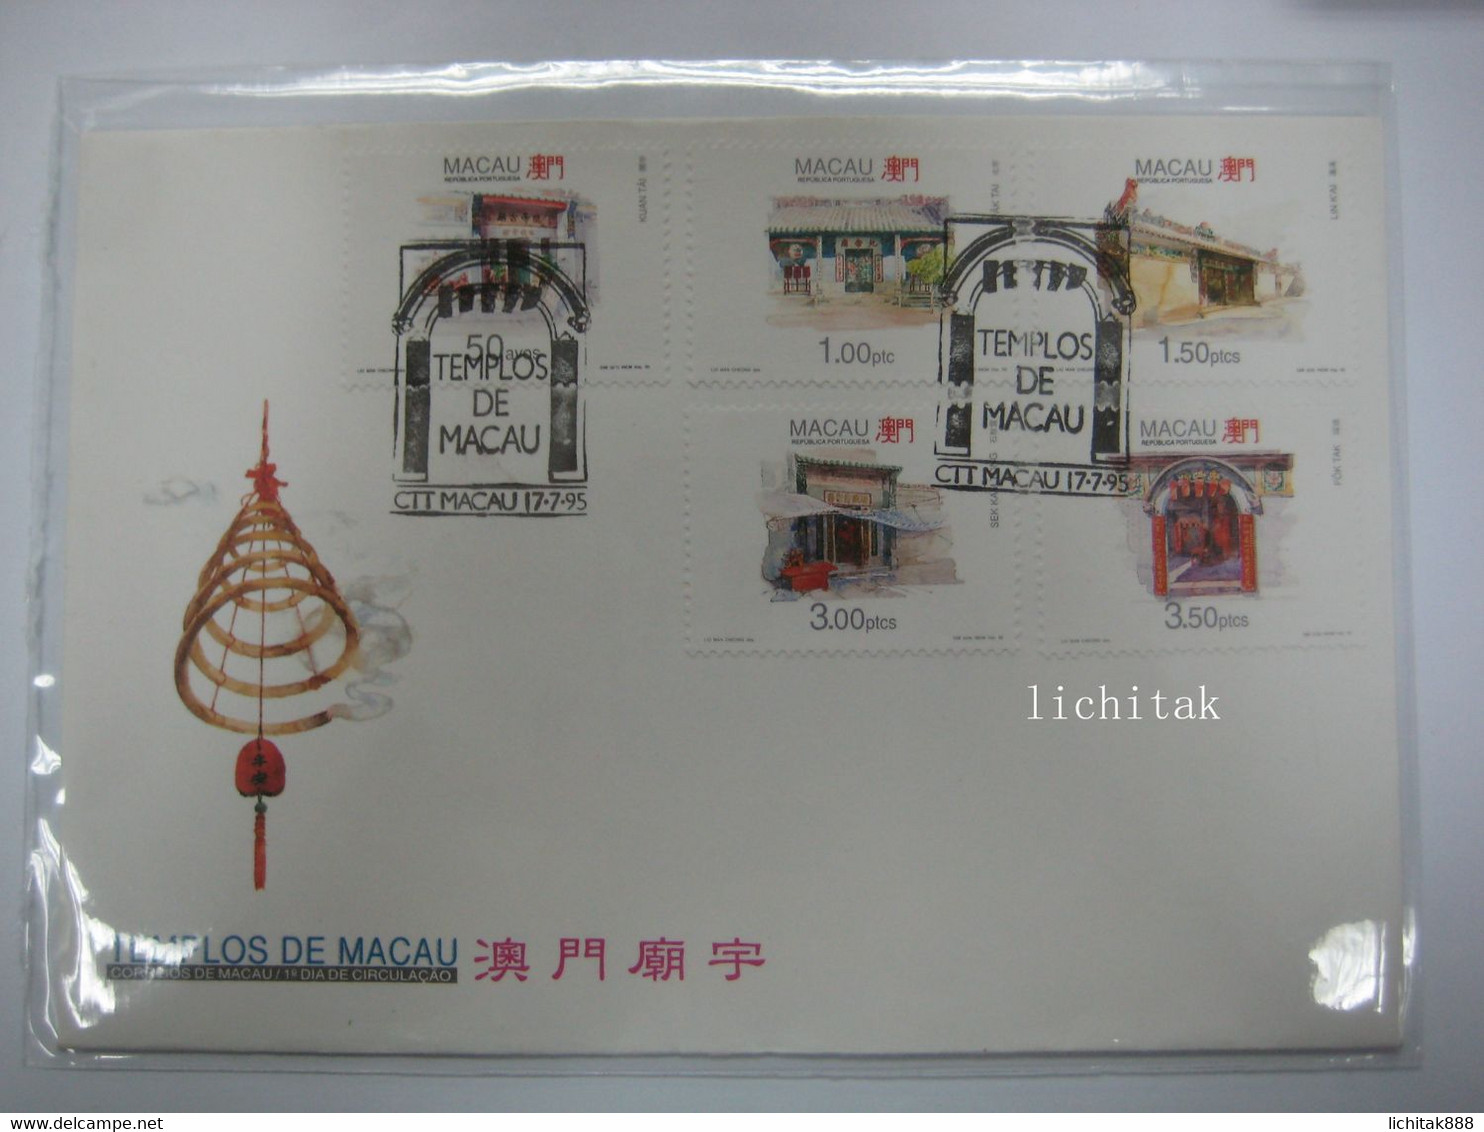 Macau Macao 1995 Temples III Stamp First Day Cover FDC - FDC